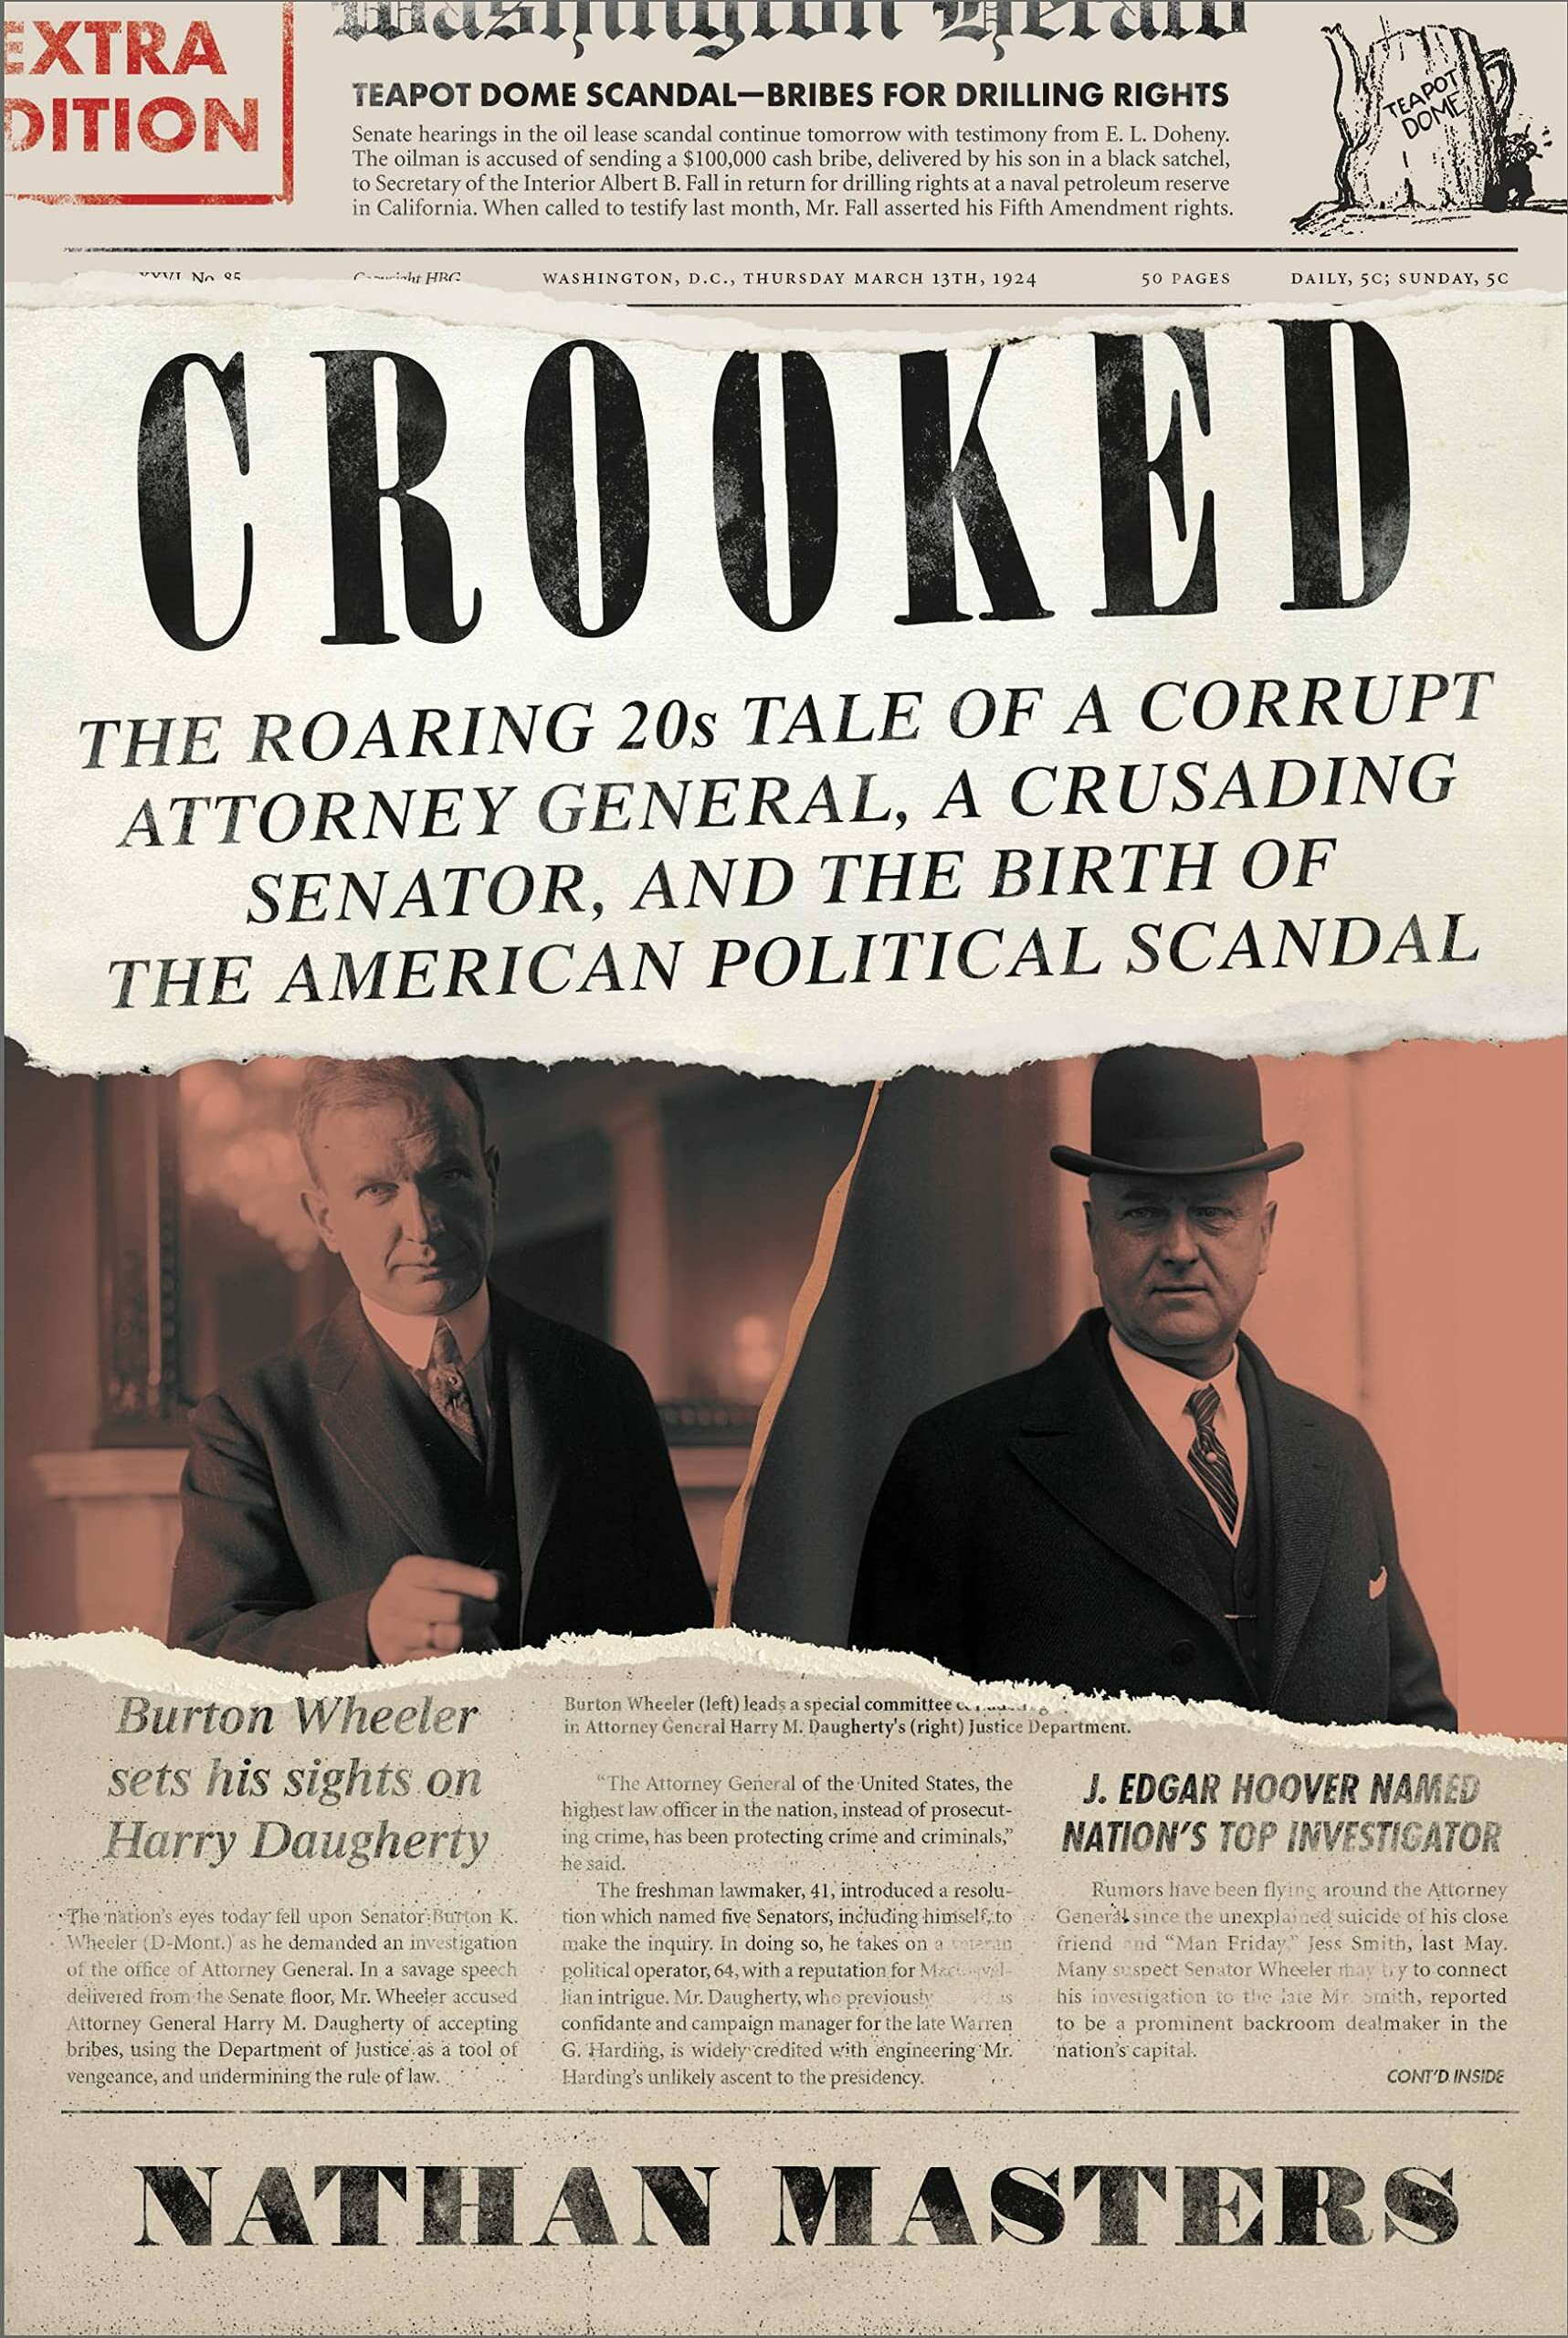 Crooked: The Roaring '20s Tale of a Corrupt Attorney General, a Crusading Senator, and the Birth of the American Political Scandal